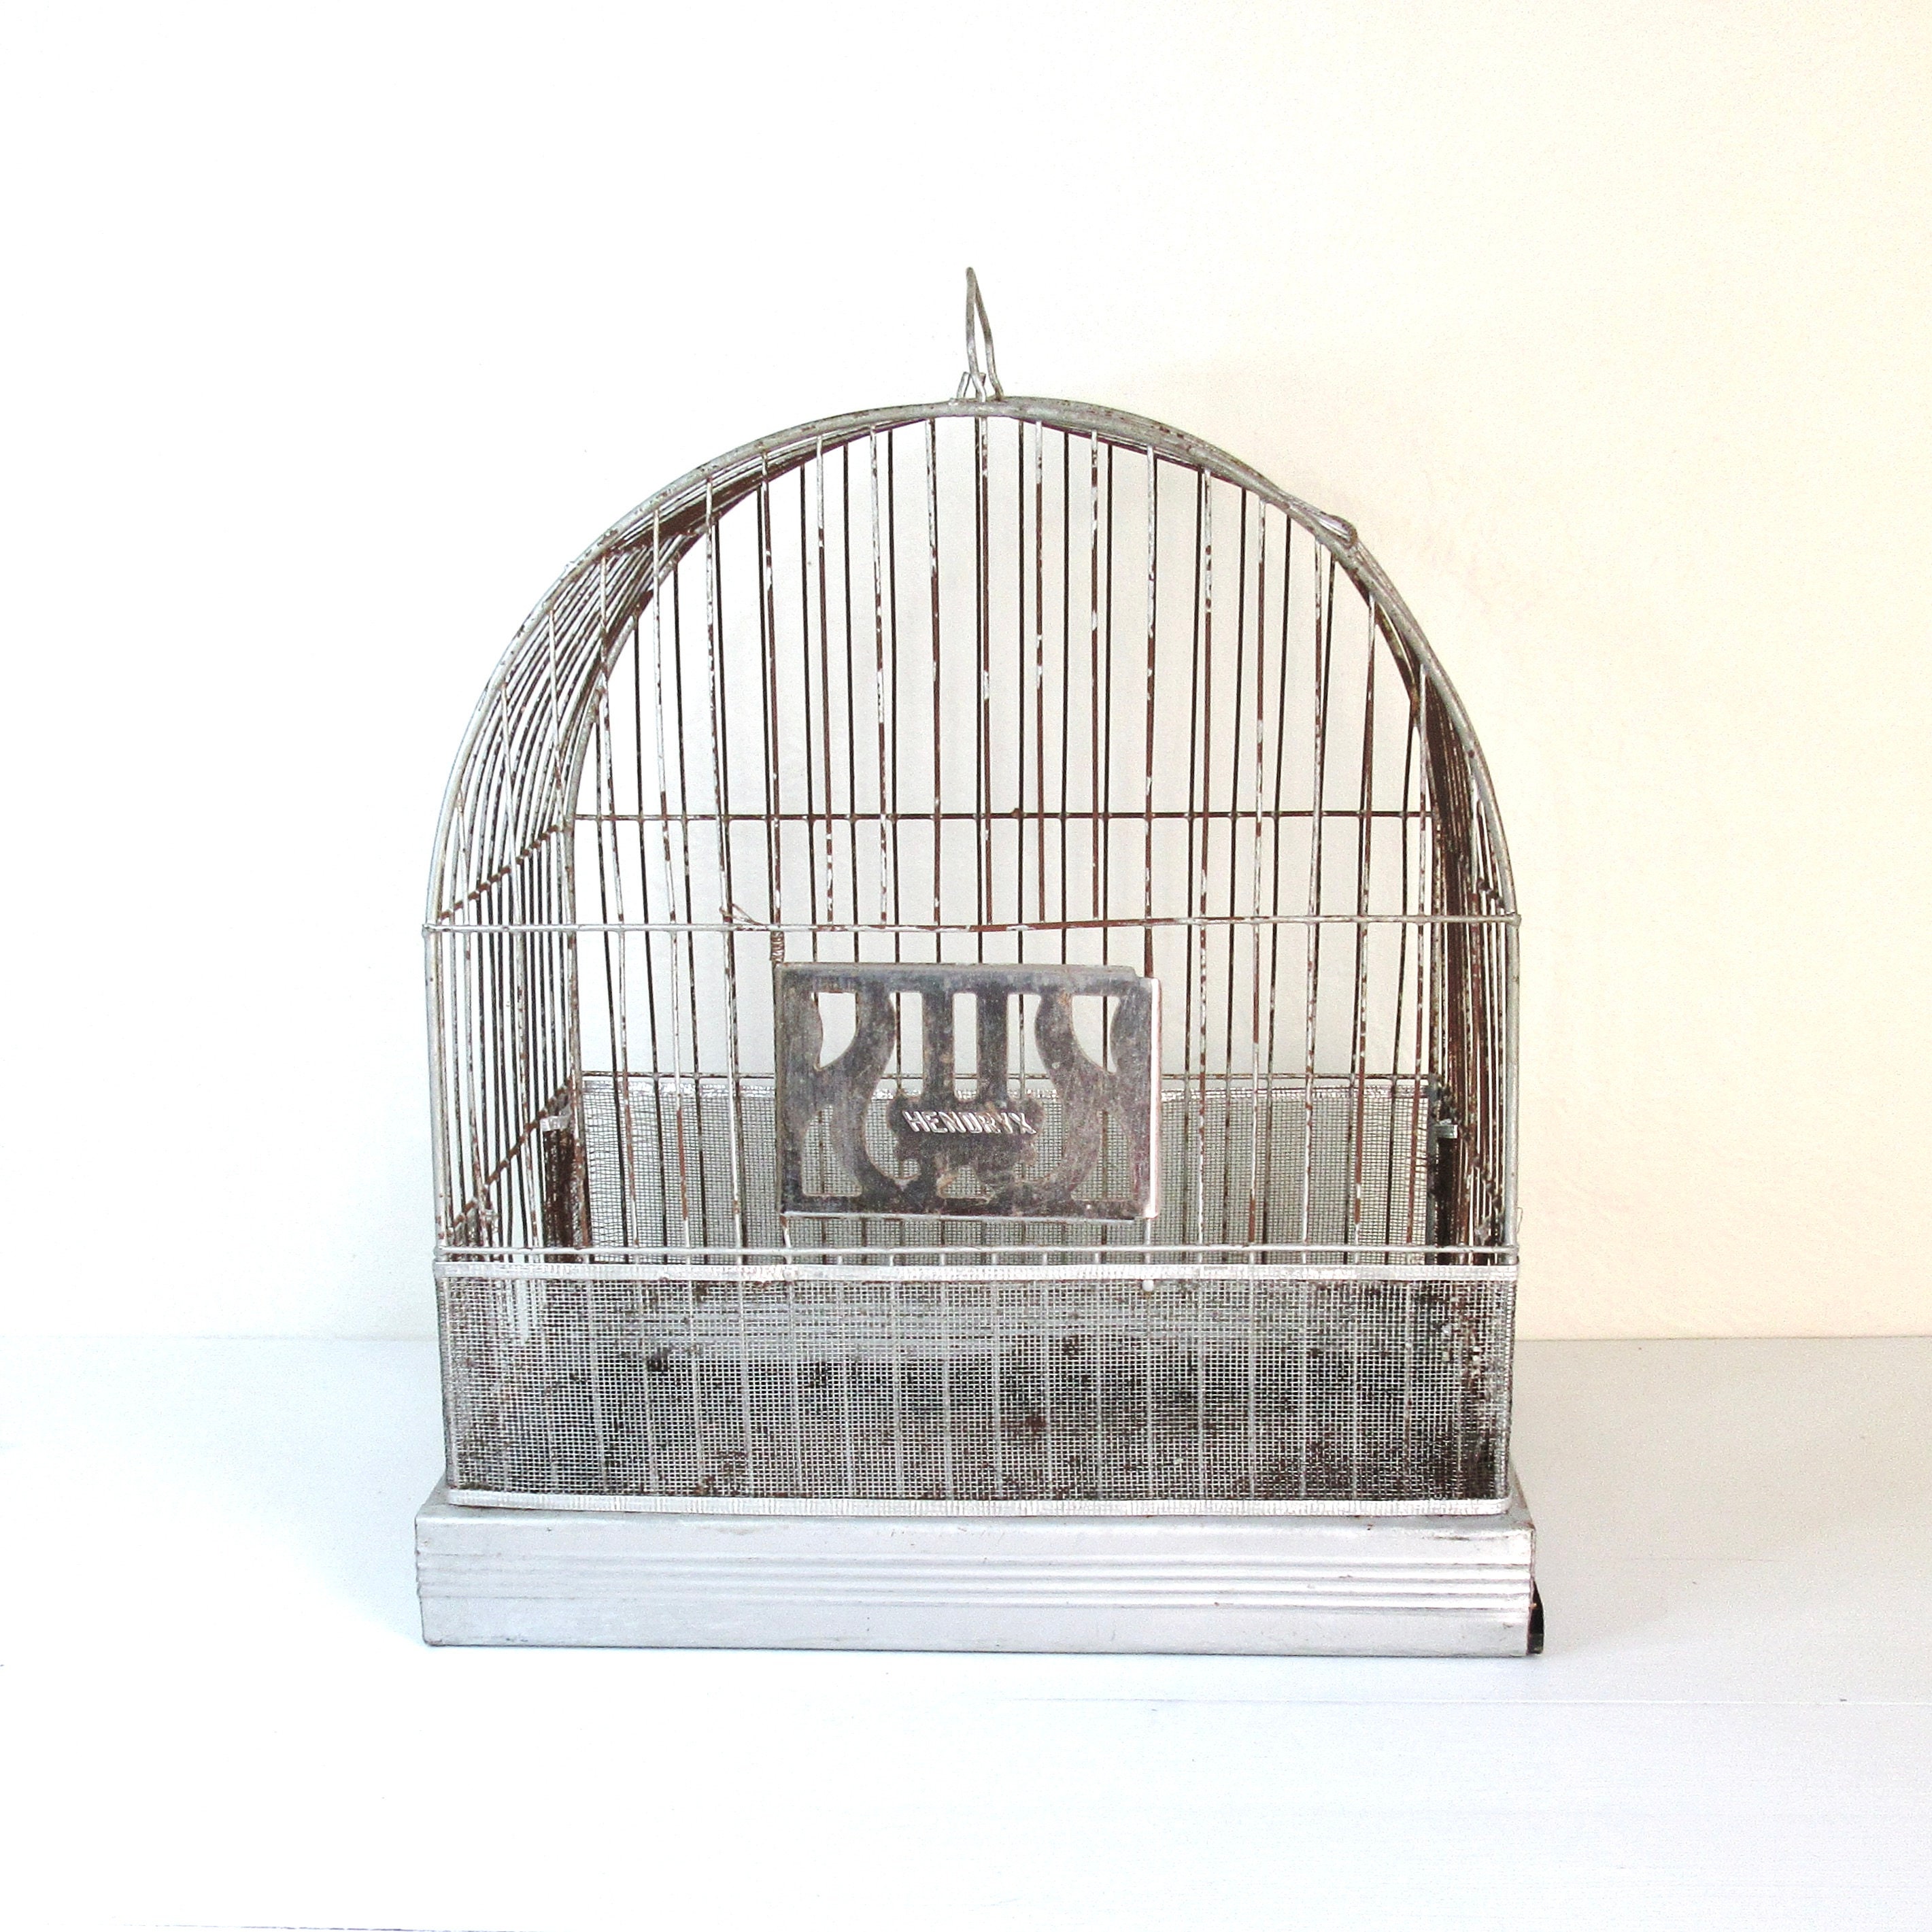 Vintage Hendryx Bird Cage: Rustic Metal Cage With True Vintage Charm  Perfect Decor for Weddings or Home, Adds Timeless Beauty to Any Space 